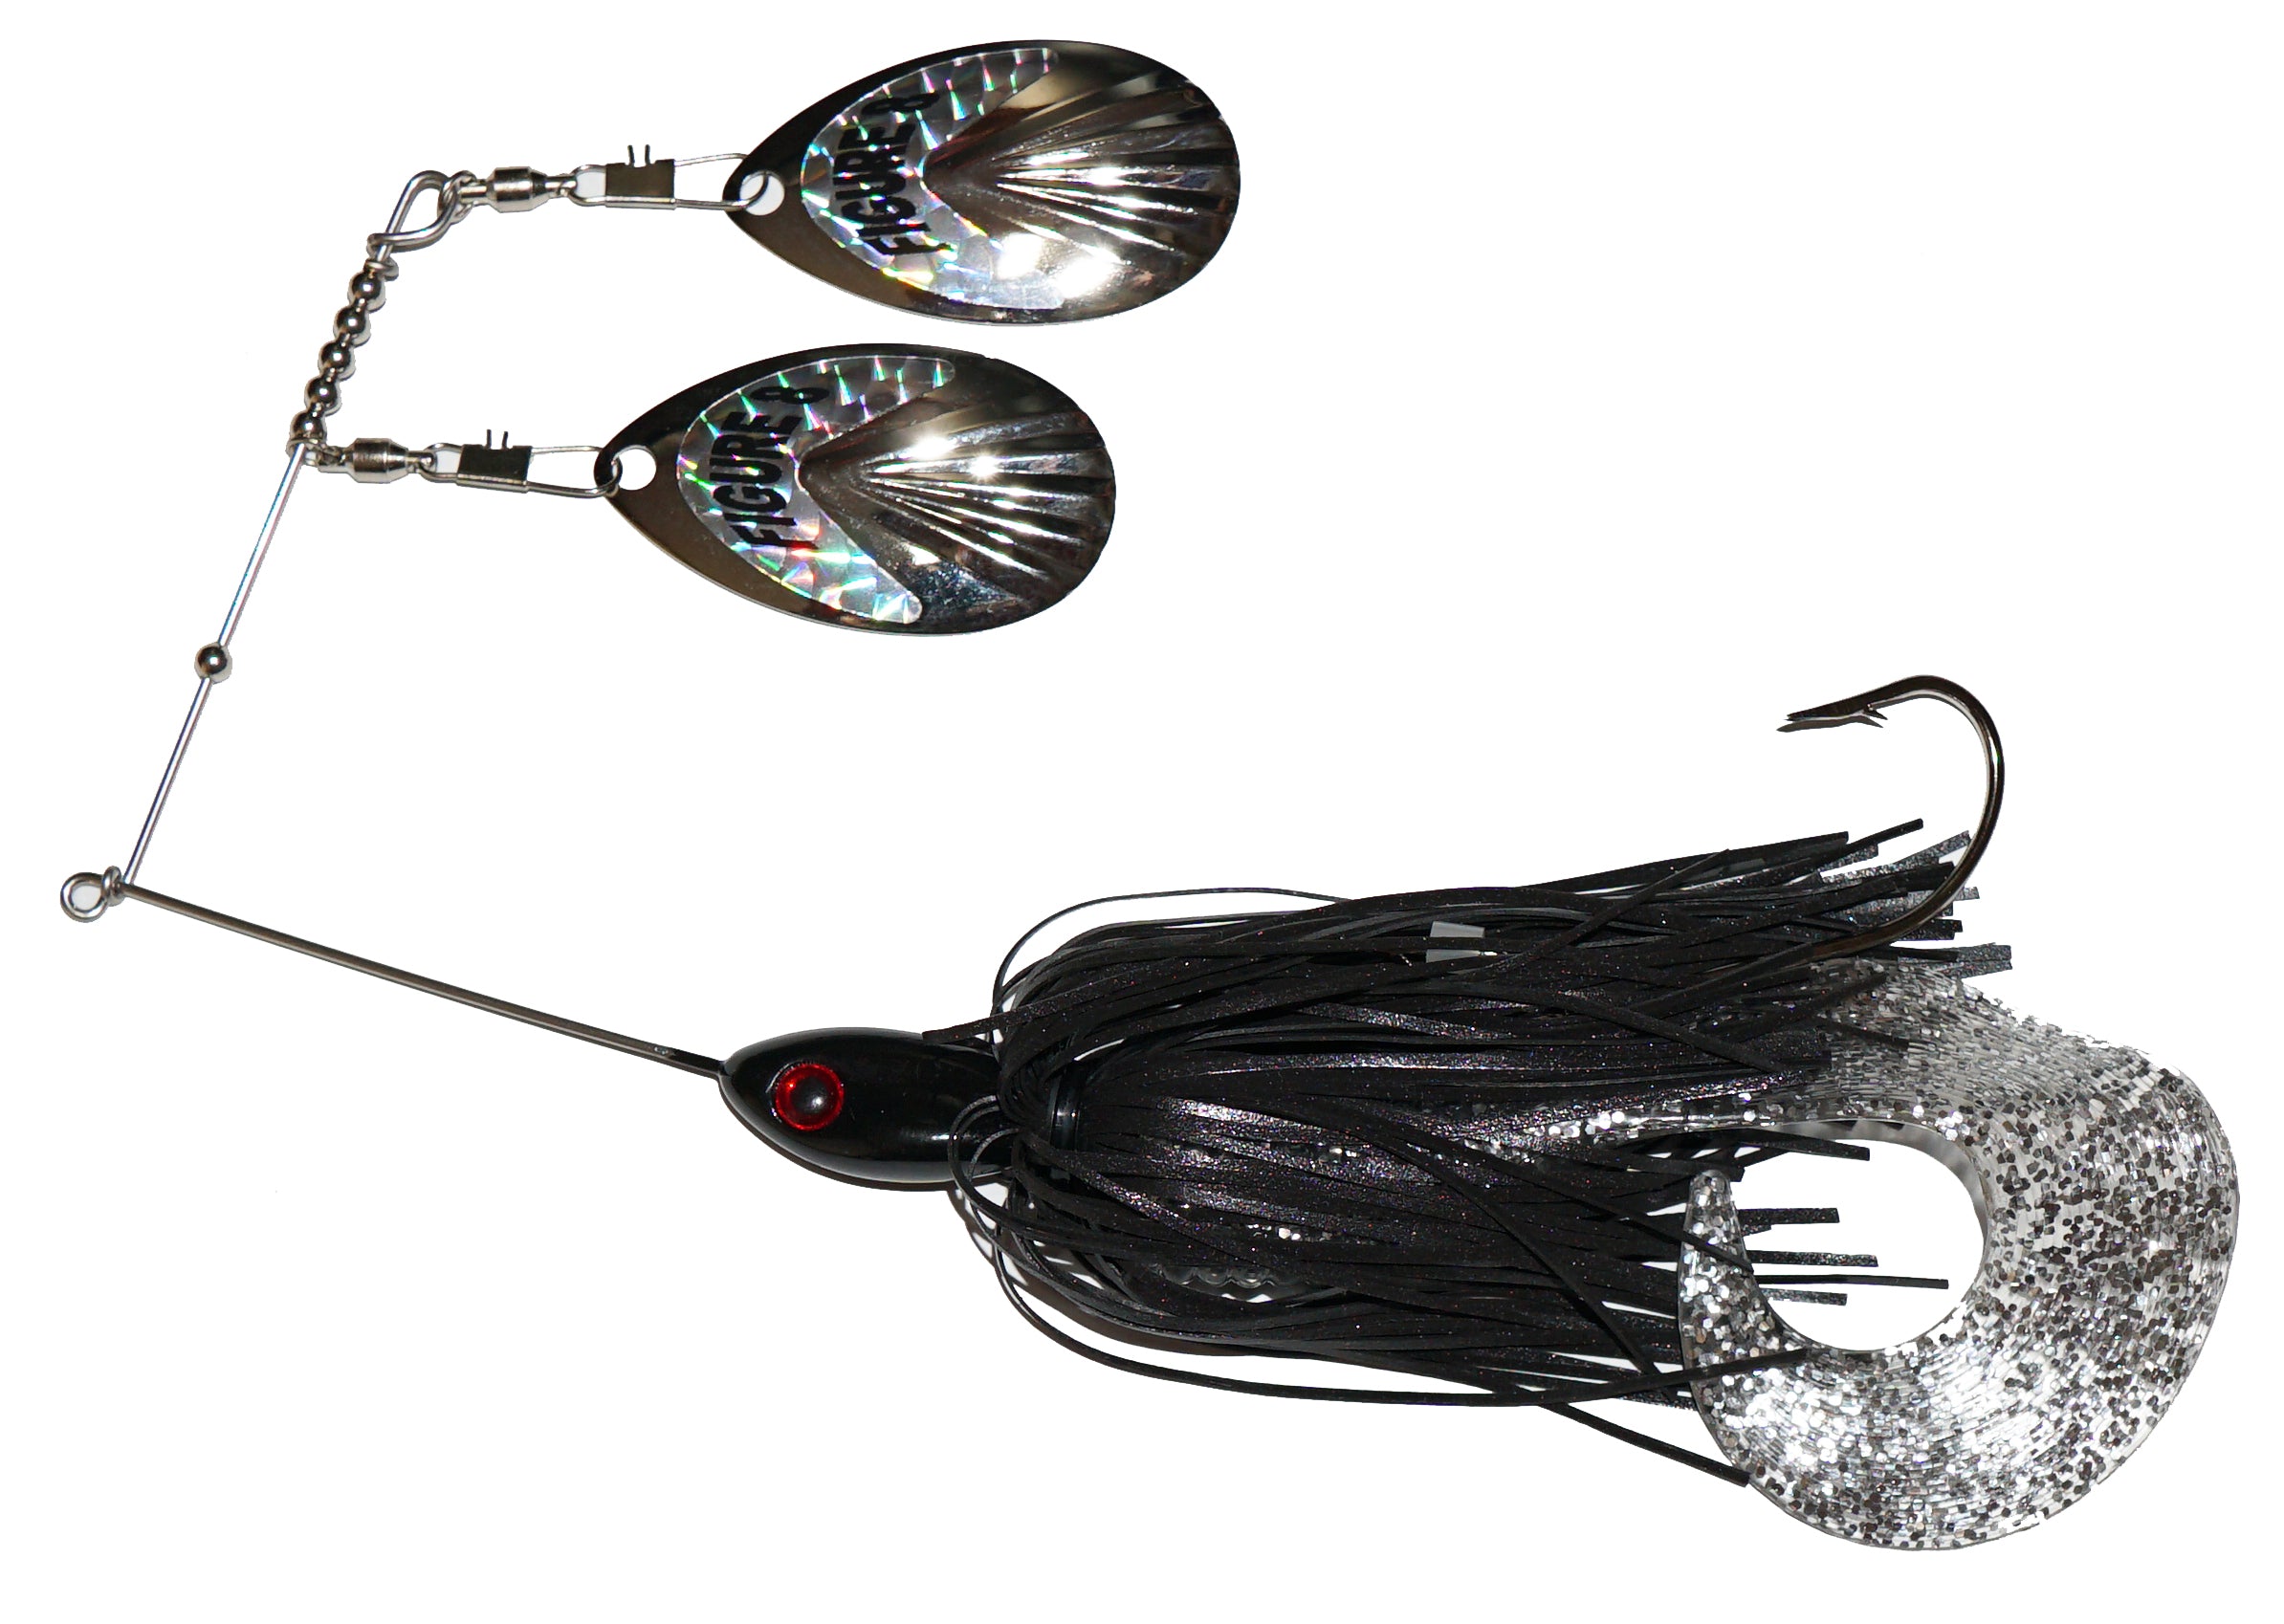 Figure 8 The Bomb Spinnerbait Cotton Candy